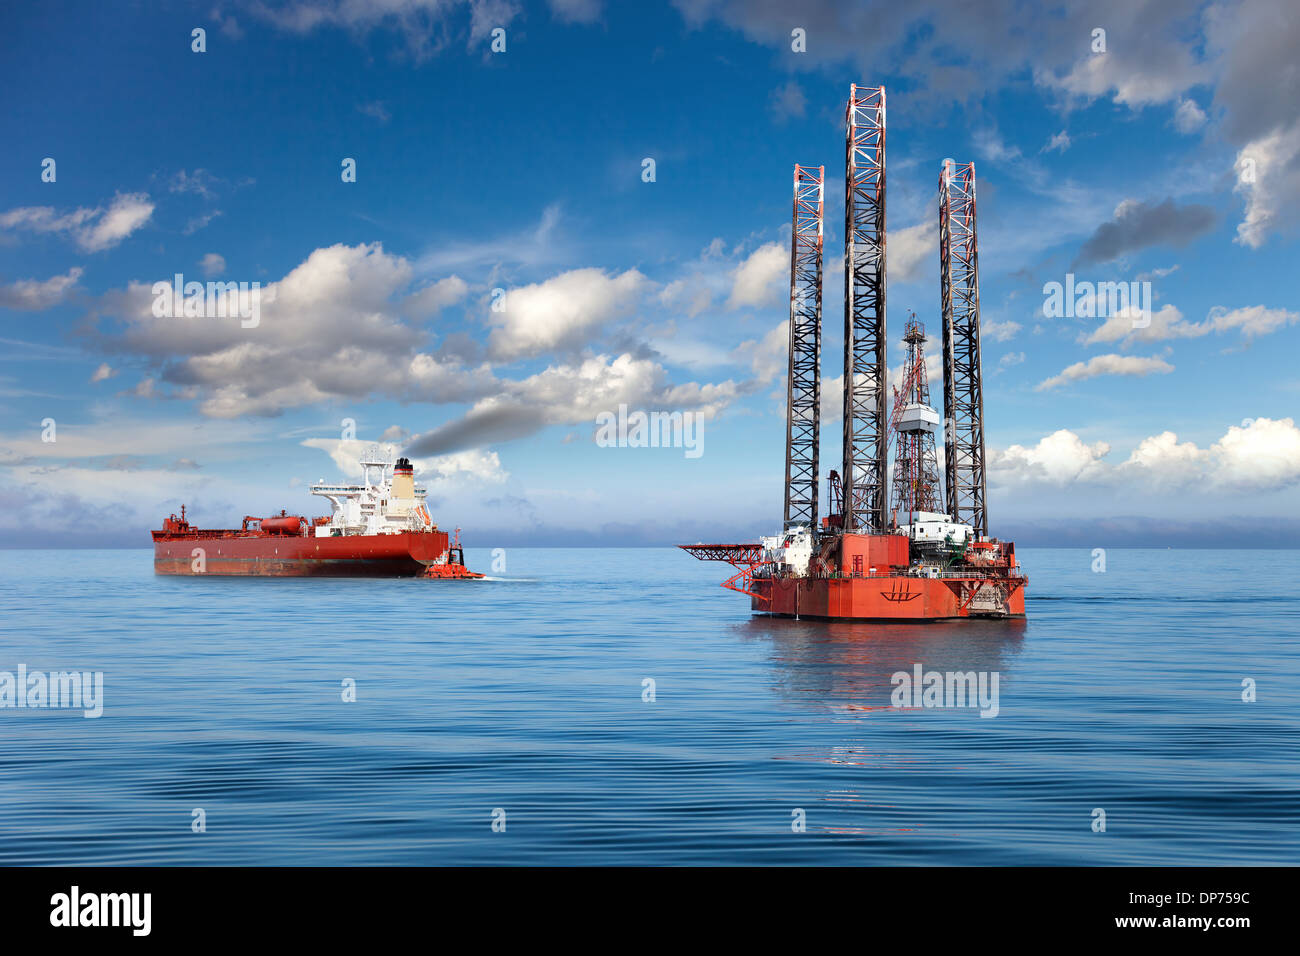 Oil rig and tanker ship on offshore area. Stock Photo